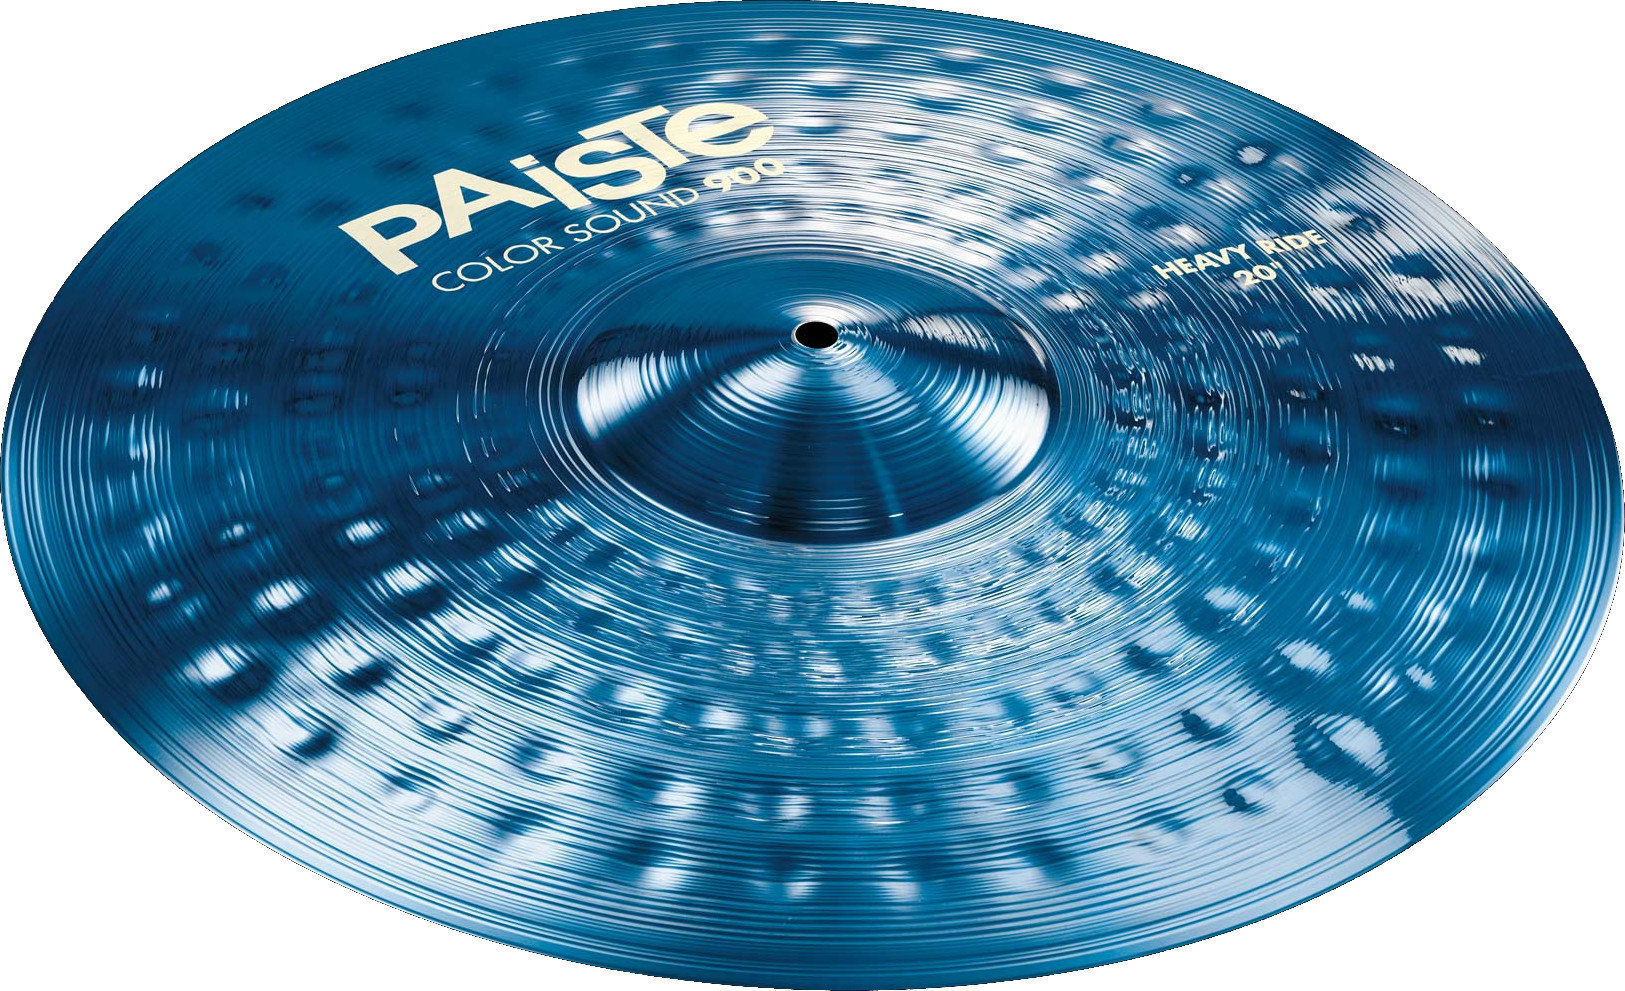 Ride Cymbal Paiste Color Sound 900  Heavy Ride Cymbal 20" Blue